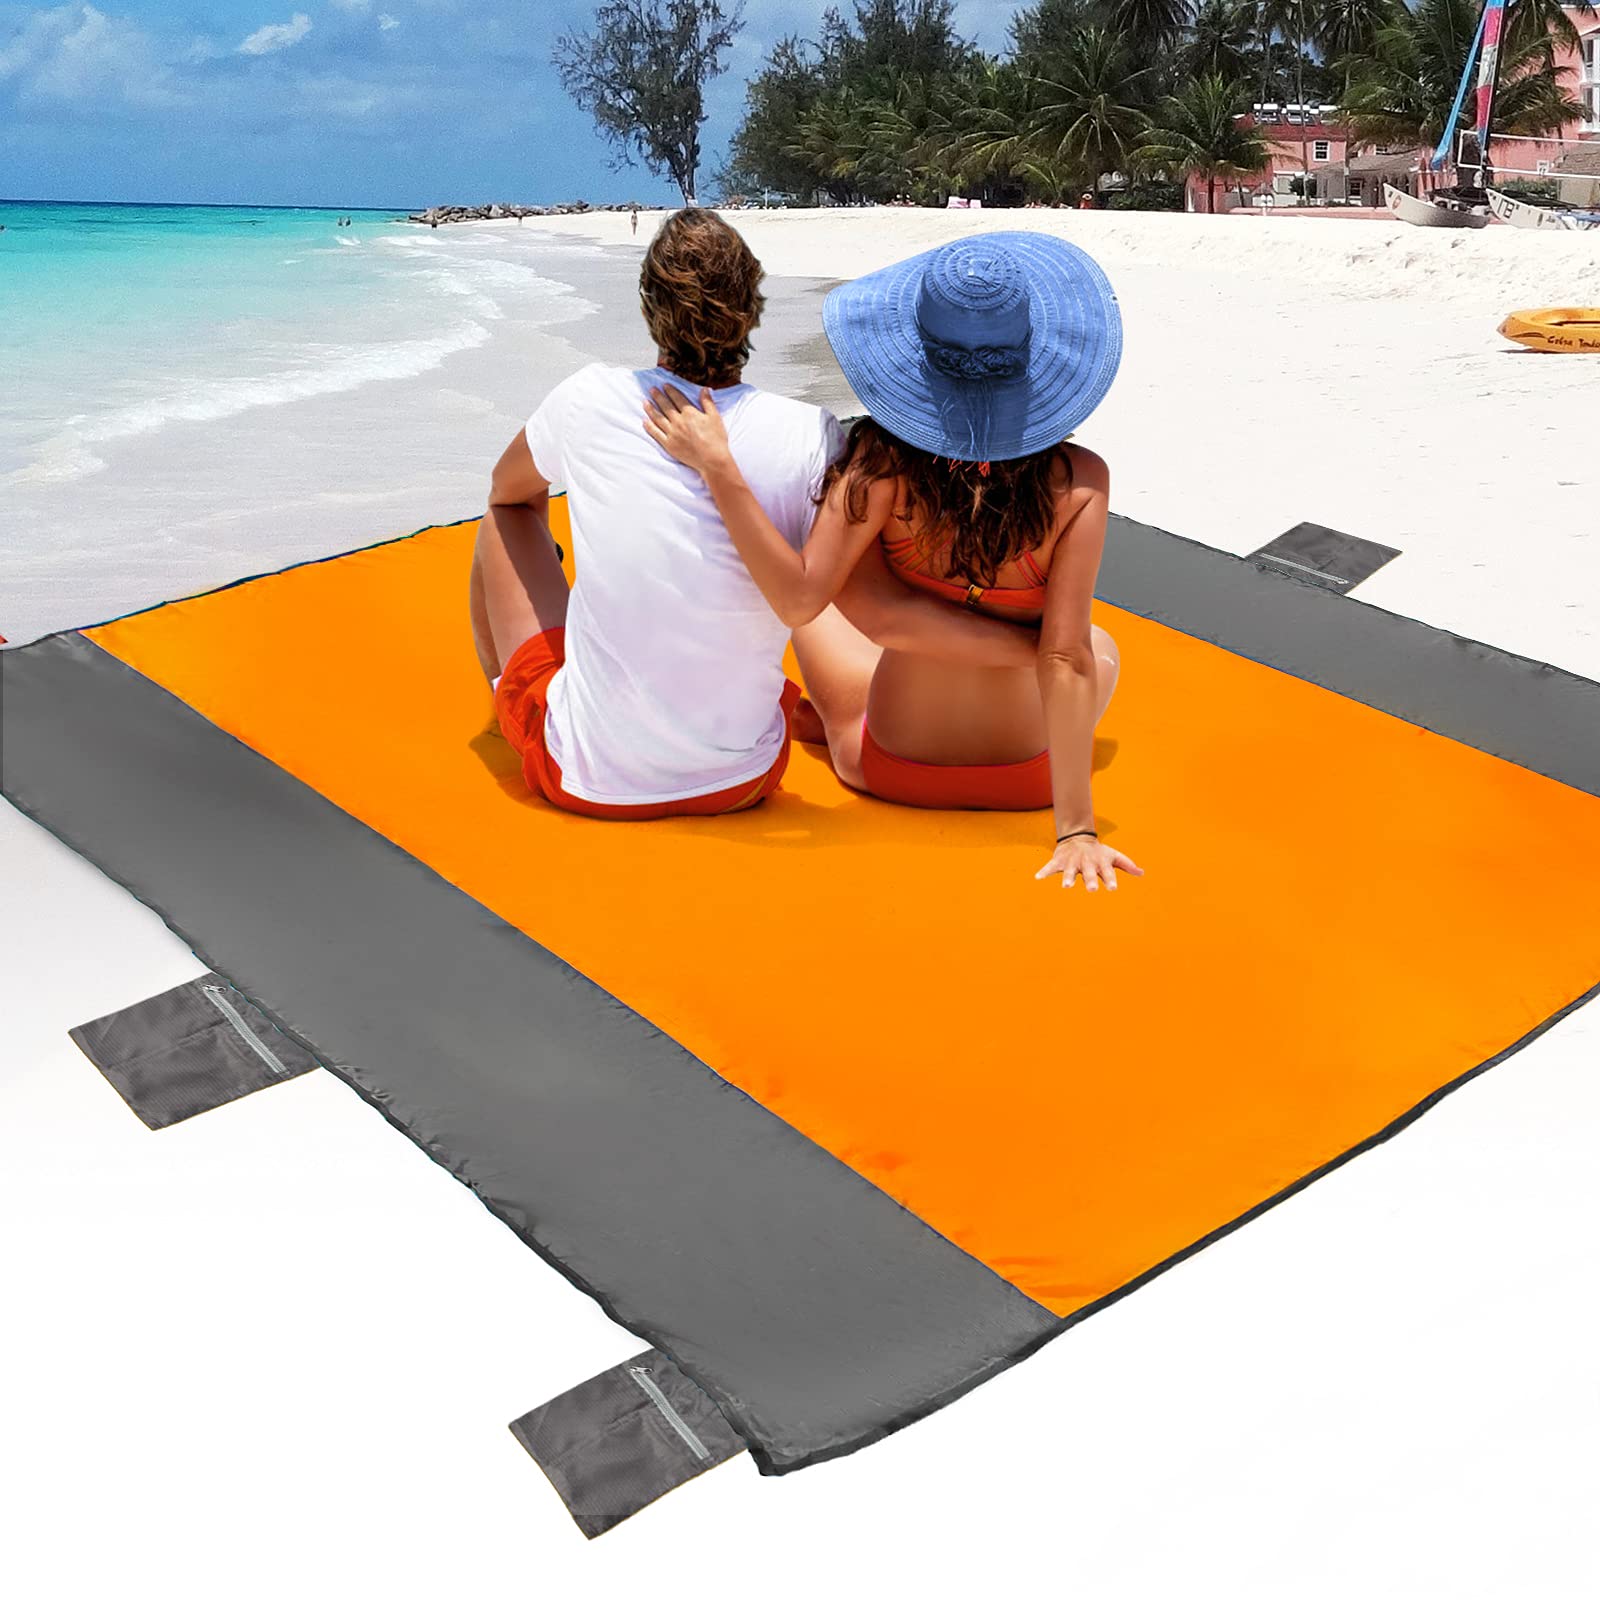 POPCHOSE Sandfree Beach Blanket - Large 83"×78", Waterproof & Sandproof, Ideal for 2 Adults, Lightweight, Easy to Clean, with 6